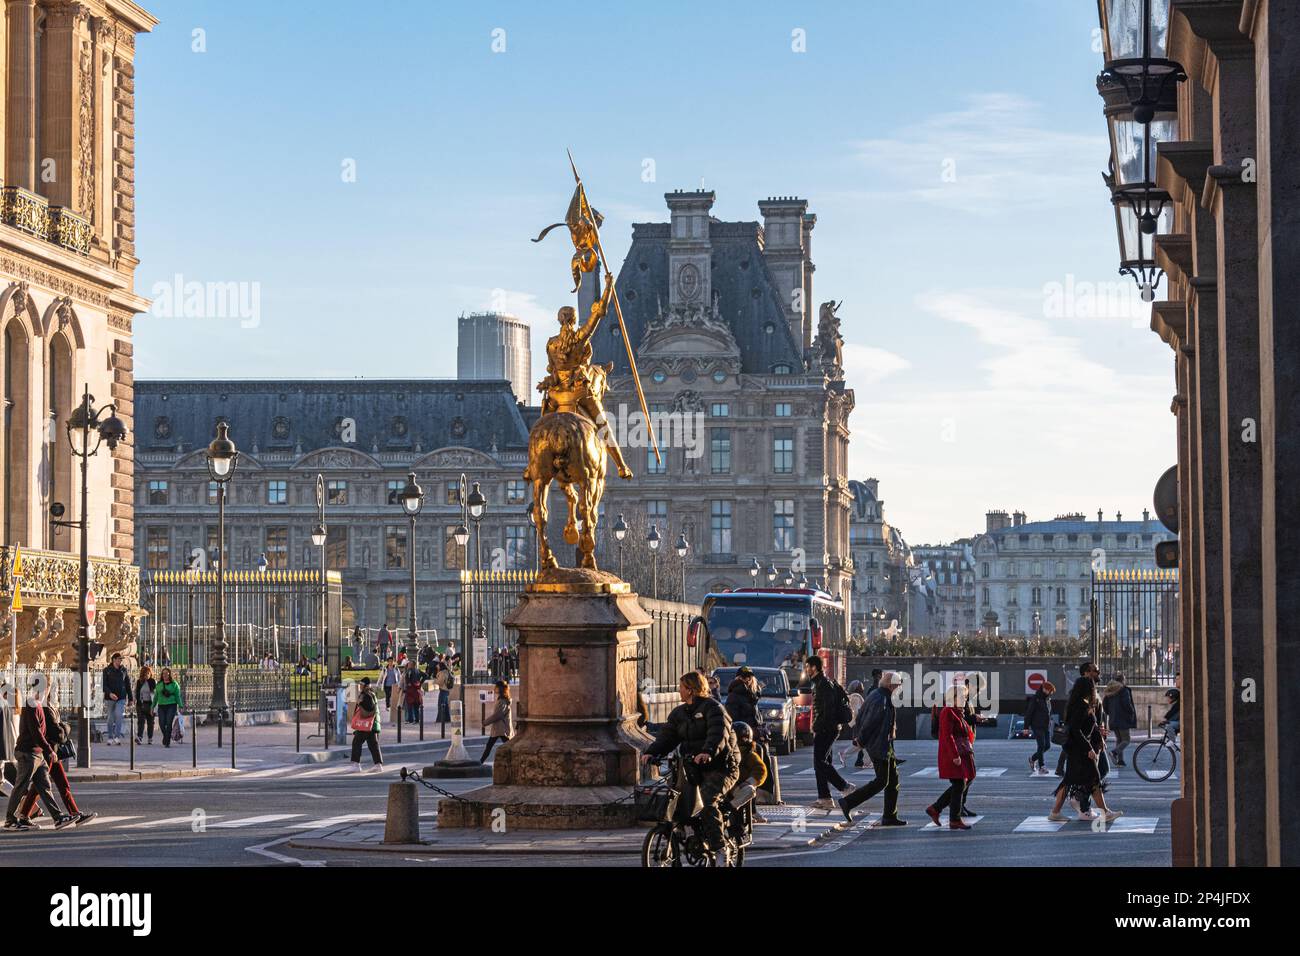 The gilded bronze equestrian statue of Joan of Arc in the Place des Pyramides, the Musee des Arts Decoratifs can be seen behind, Paris, France. Stock Photo